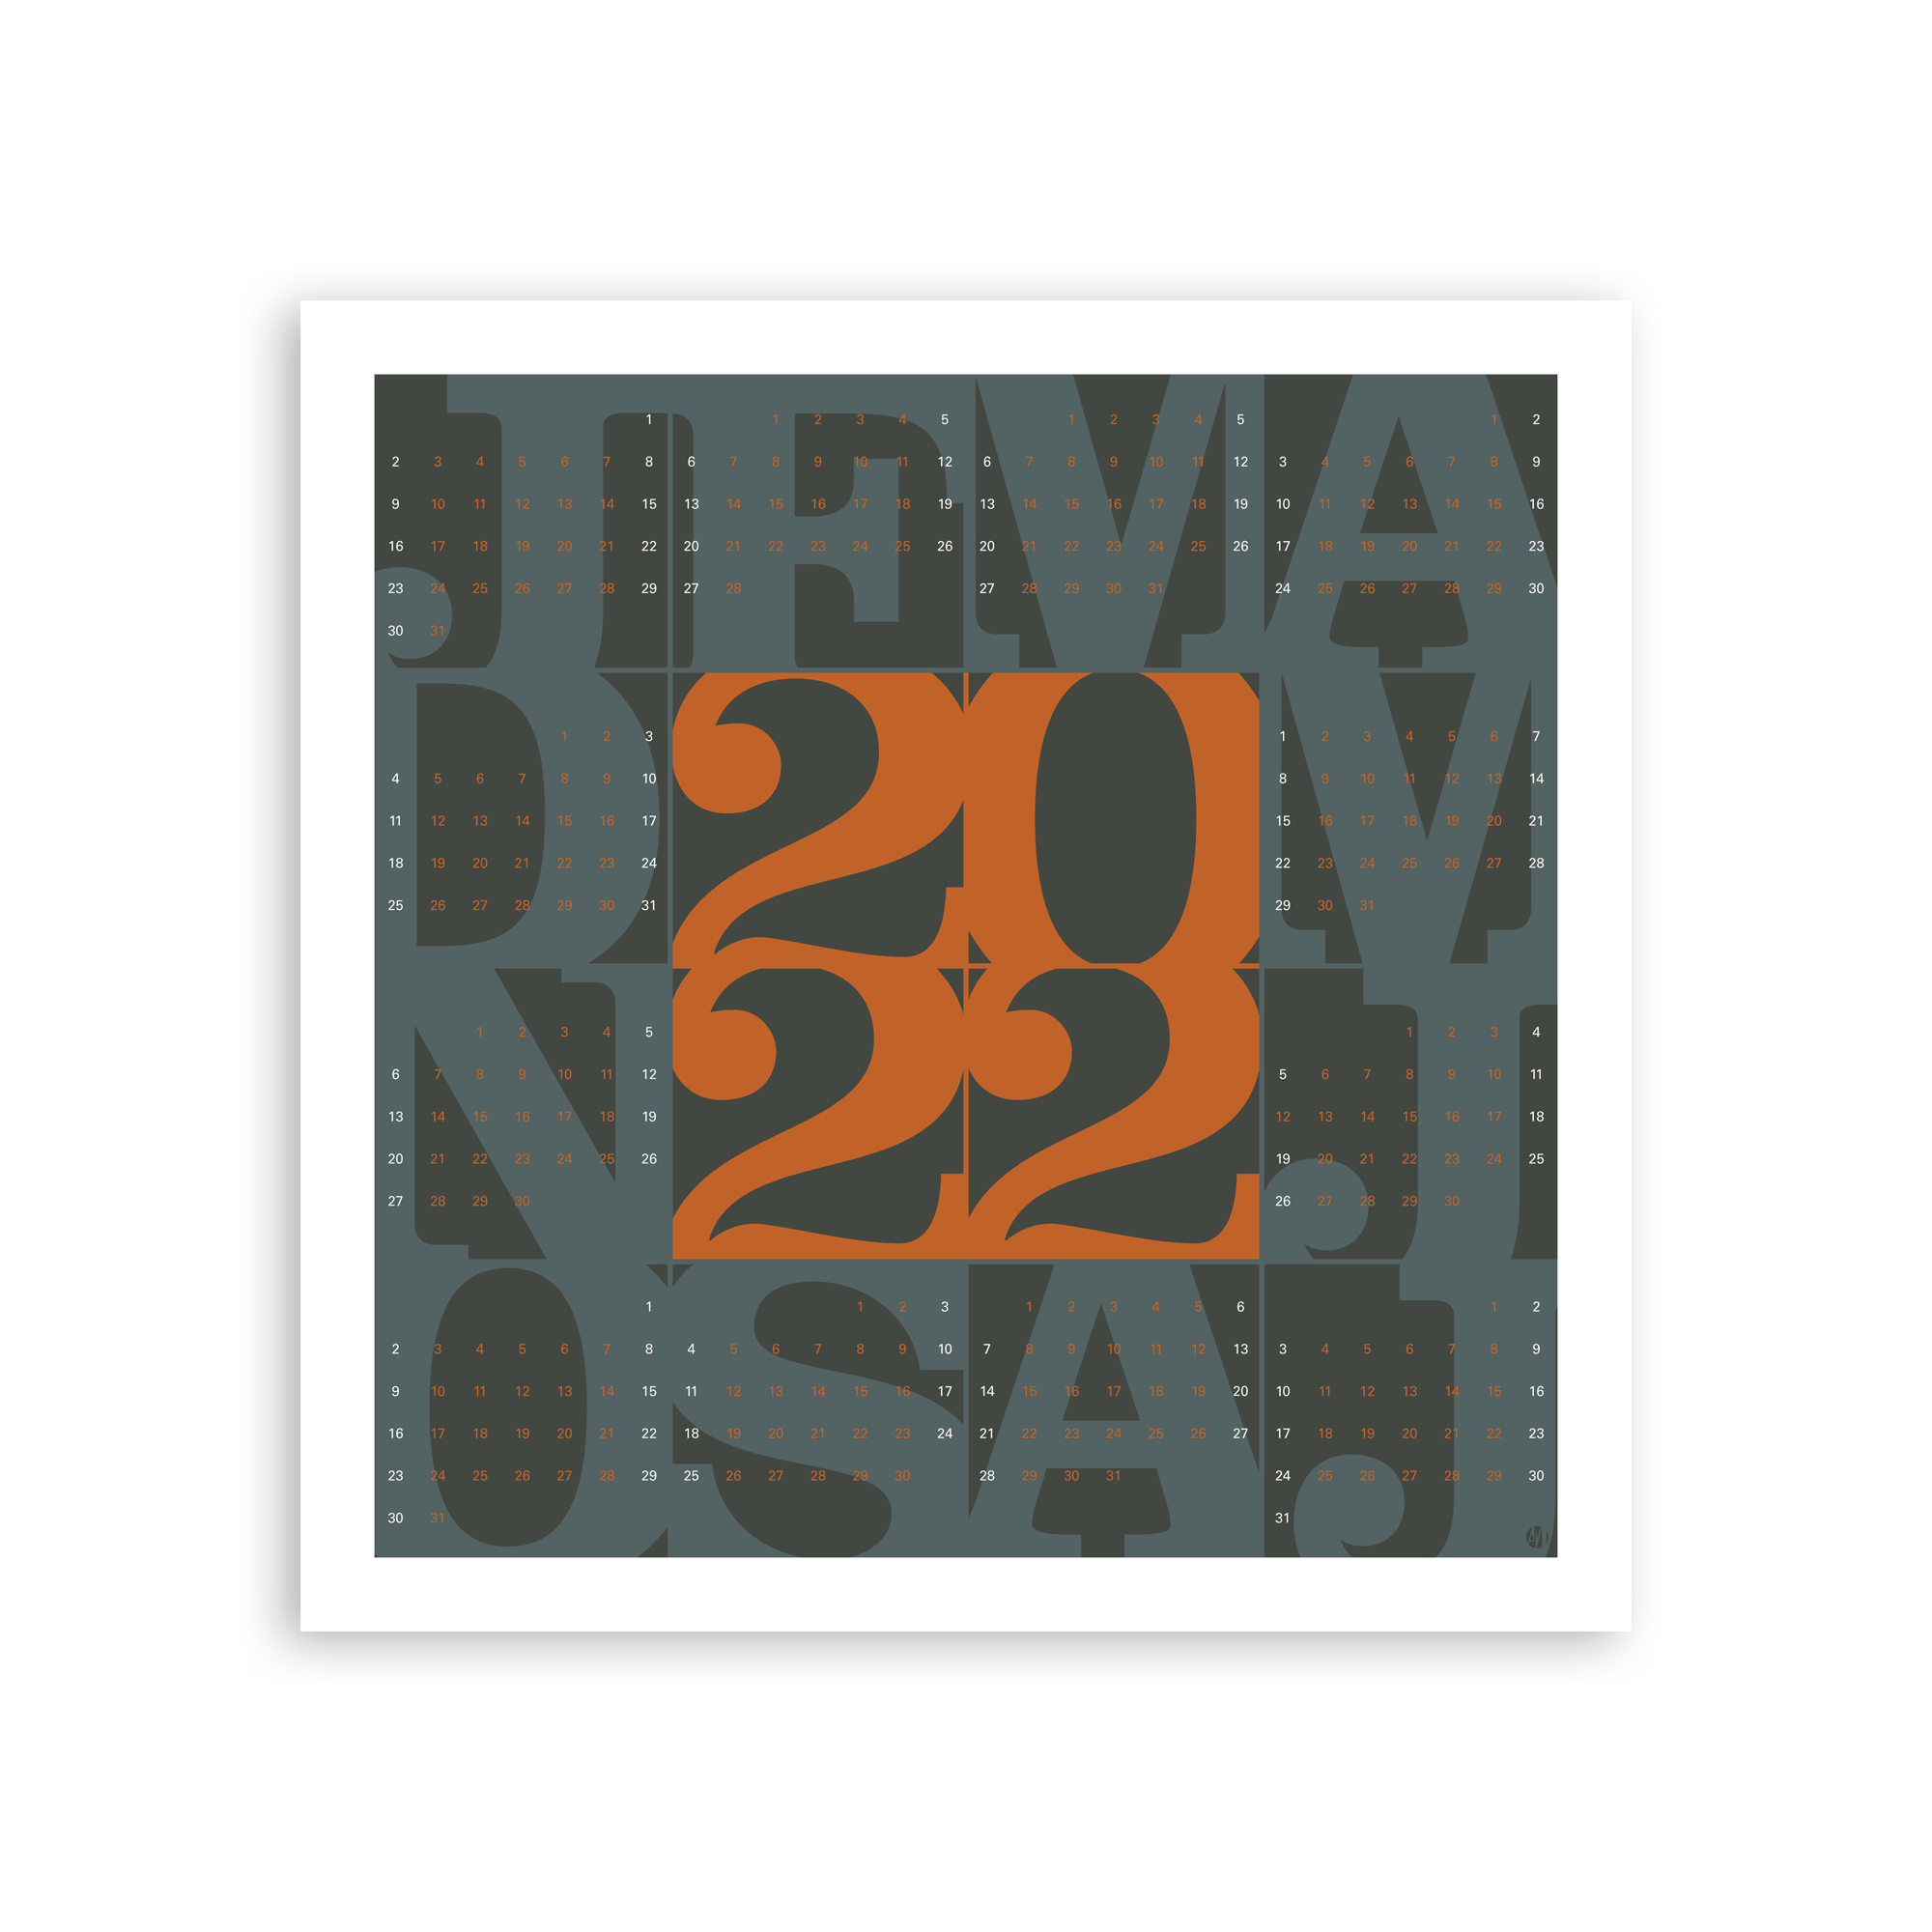 Square One (Blood Moon) – Minimalist 2022 Square Year-at-a-Glance Calendar